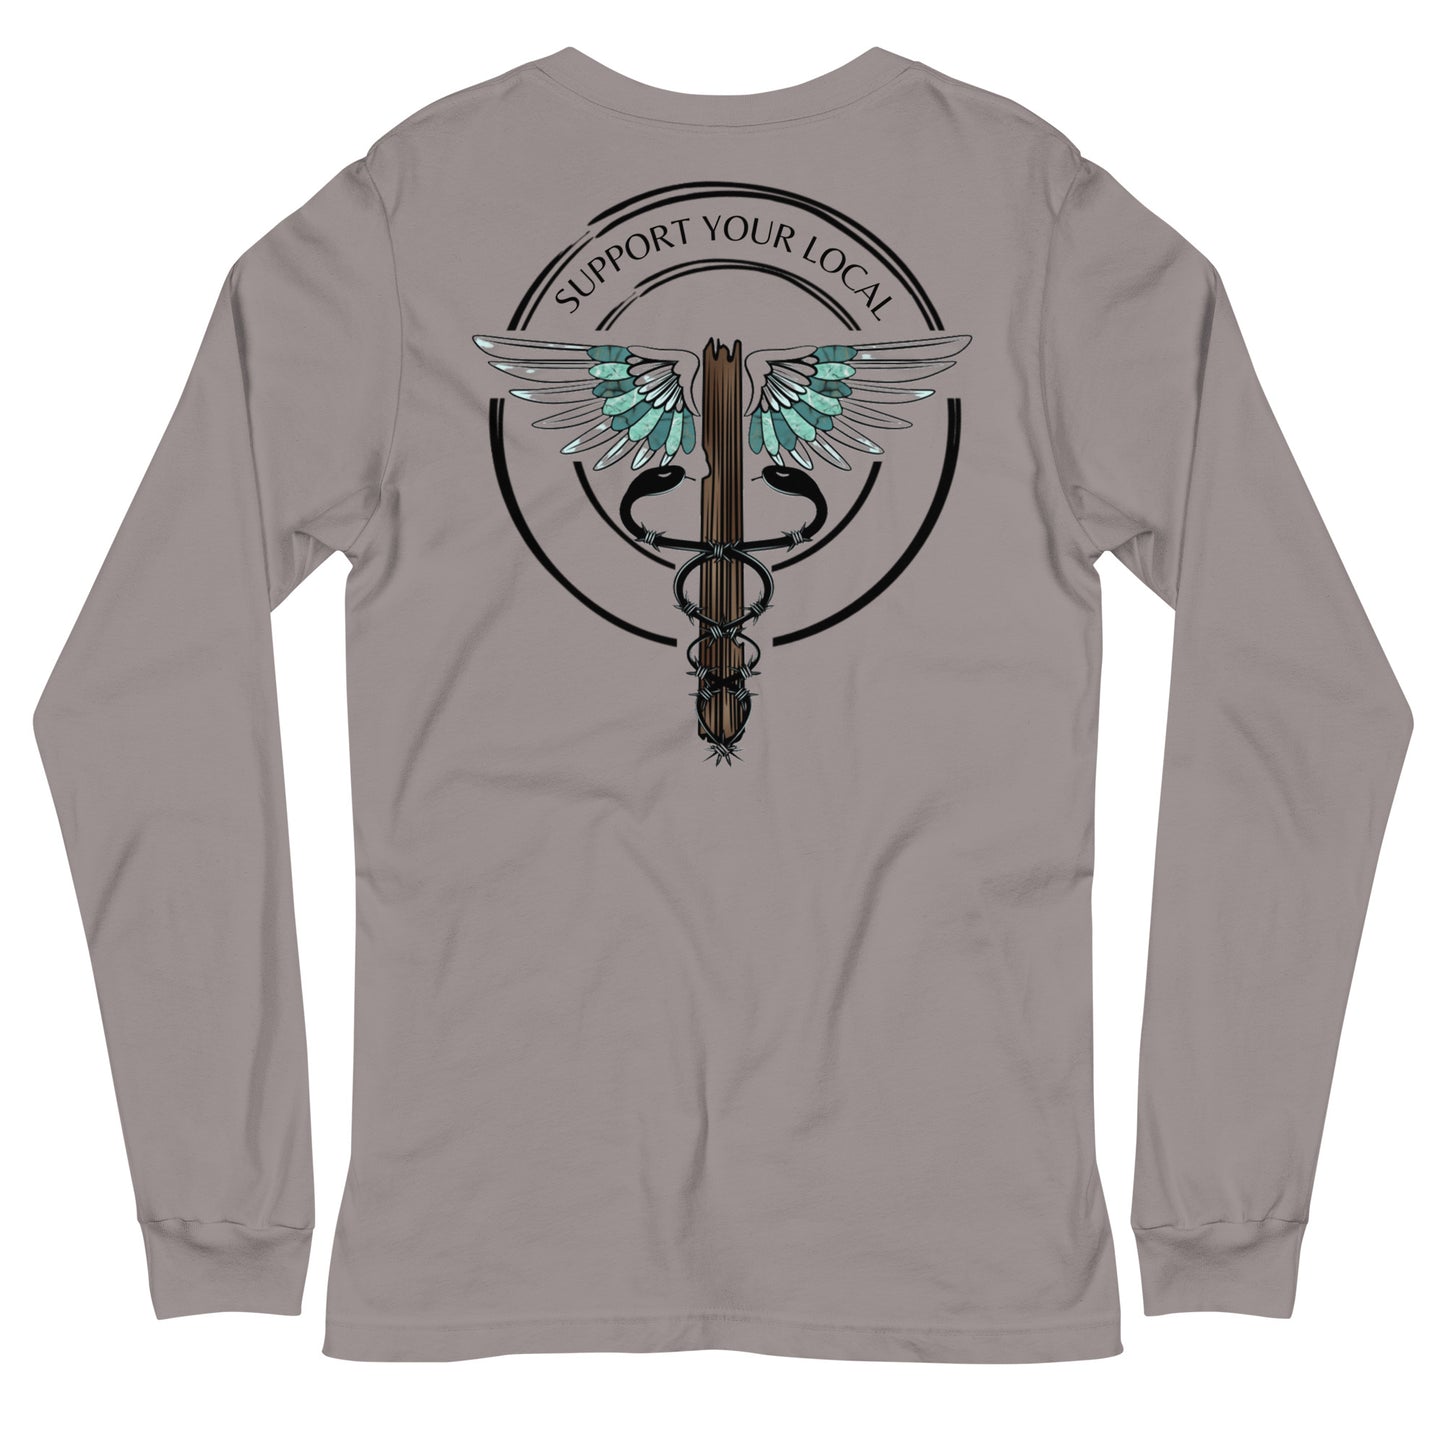 Support Your Local- Light Colors Unisex Long Sleeve Tee